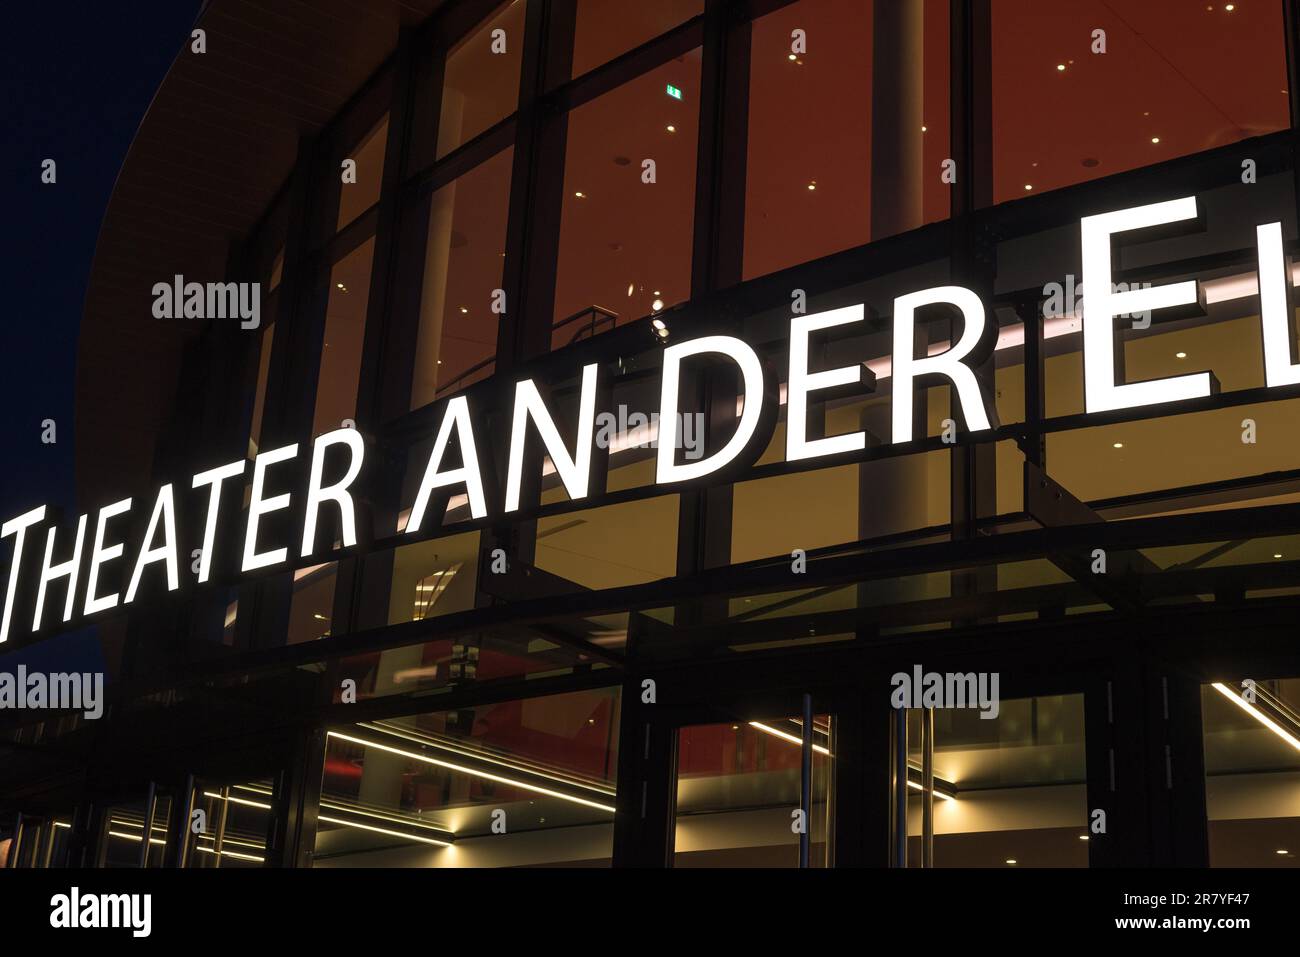 Entrance to the Musical Theater at the Elbe river on the harbor site of Hamburg. There are two musical theater directly opposite the St. Pauli Stock Photo